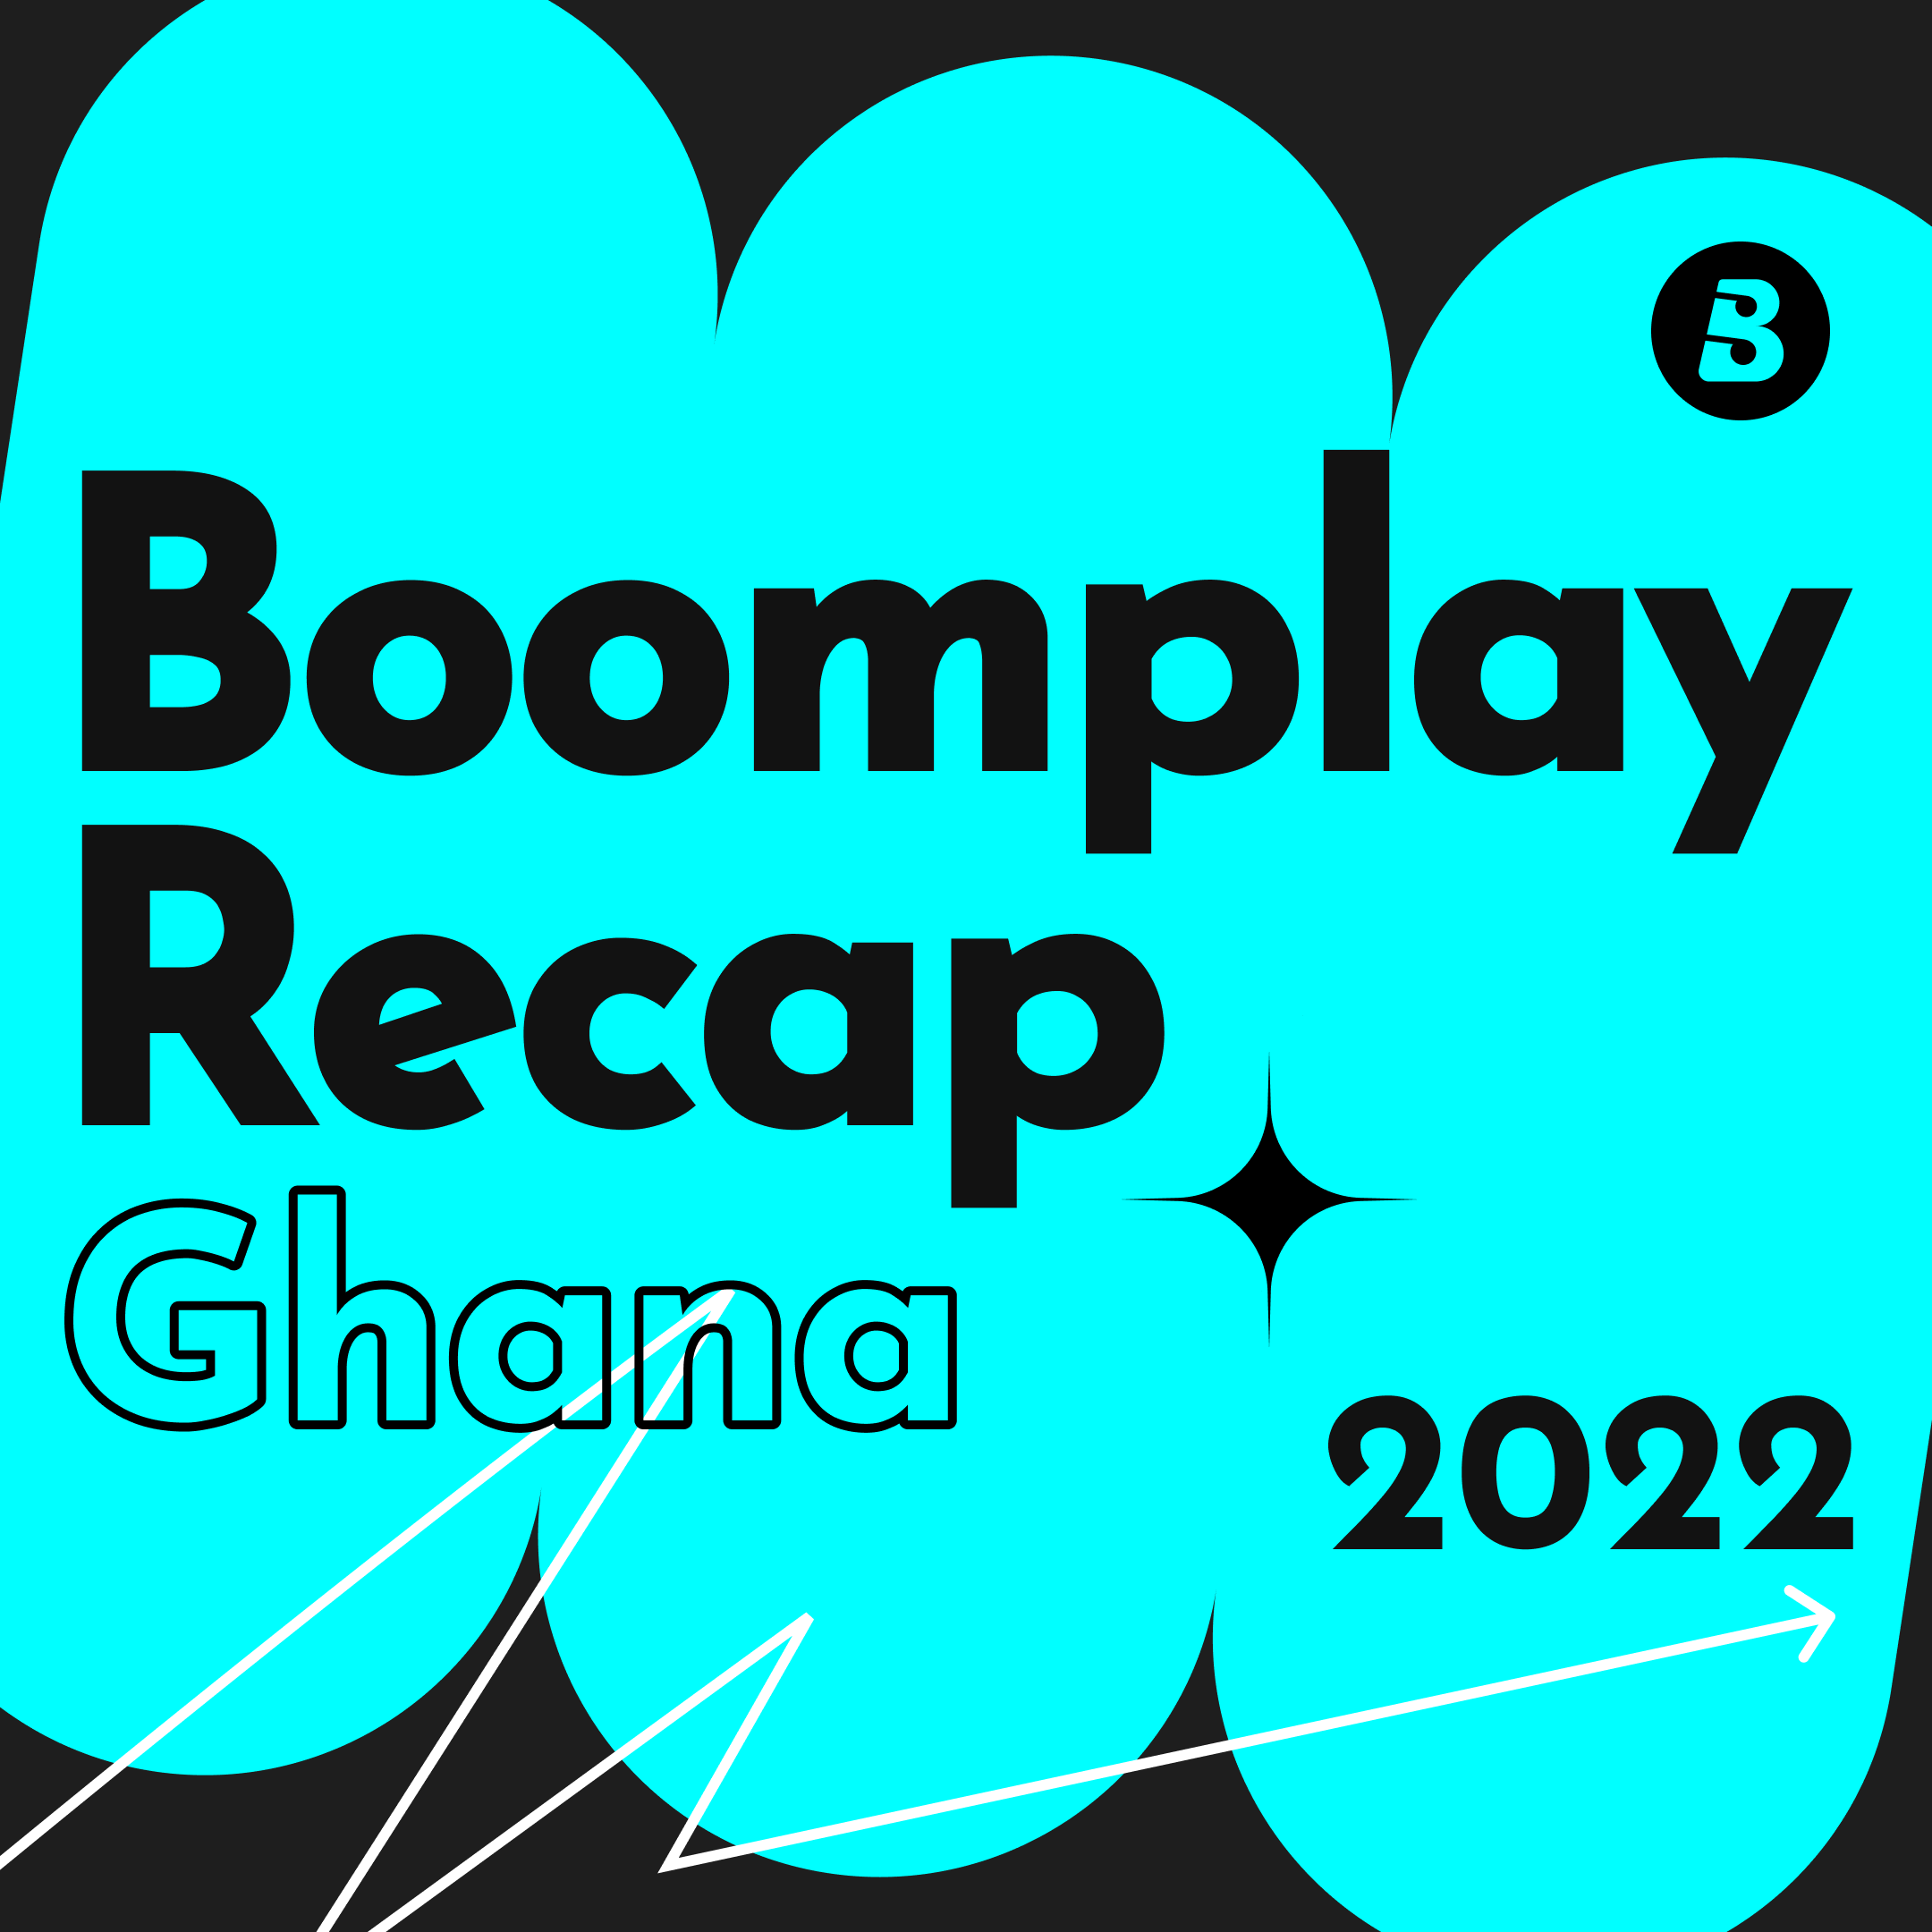 Boomplay Recap 2022: Black Sherif, Wendy Shay, Shatta Wale, Gyakie & More are Top Artists 